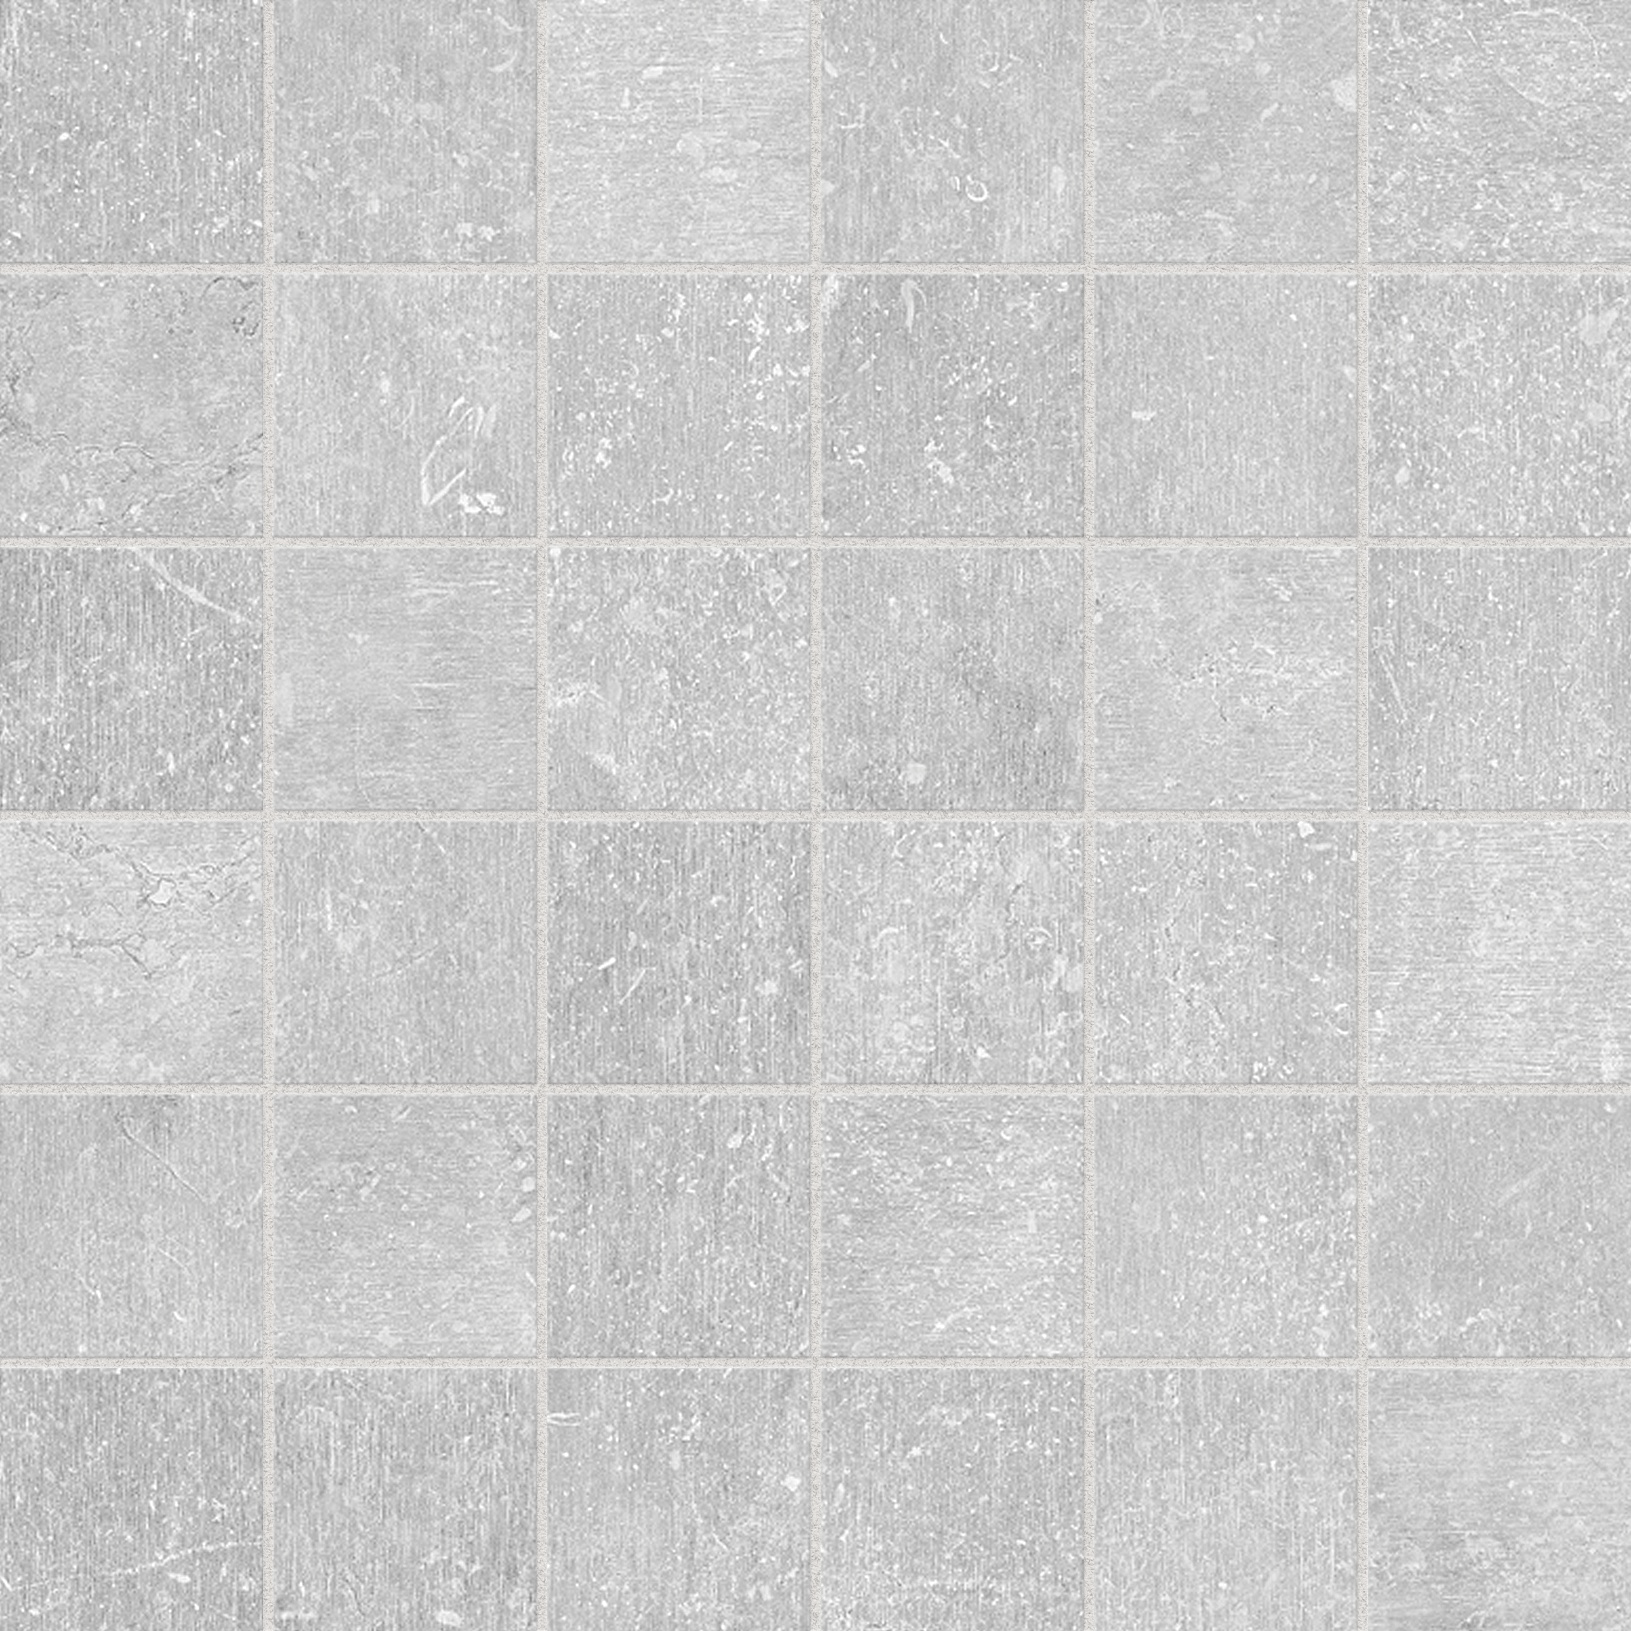 ice straight stack 2x2-inch pattern glazed porcelain mosaic from nexus anatolia collection distributed by surface group international matte finish straight edge edge mesh shape